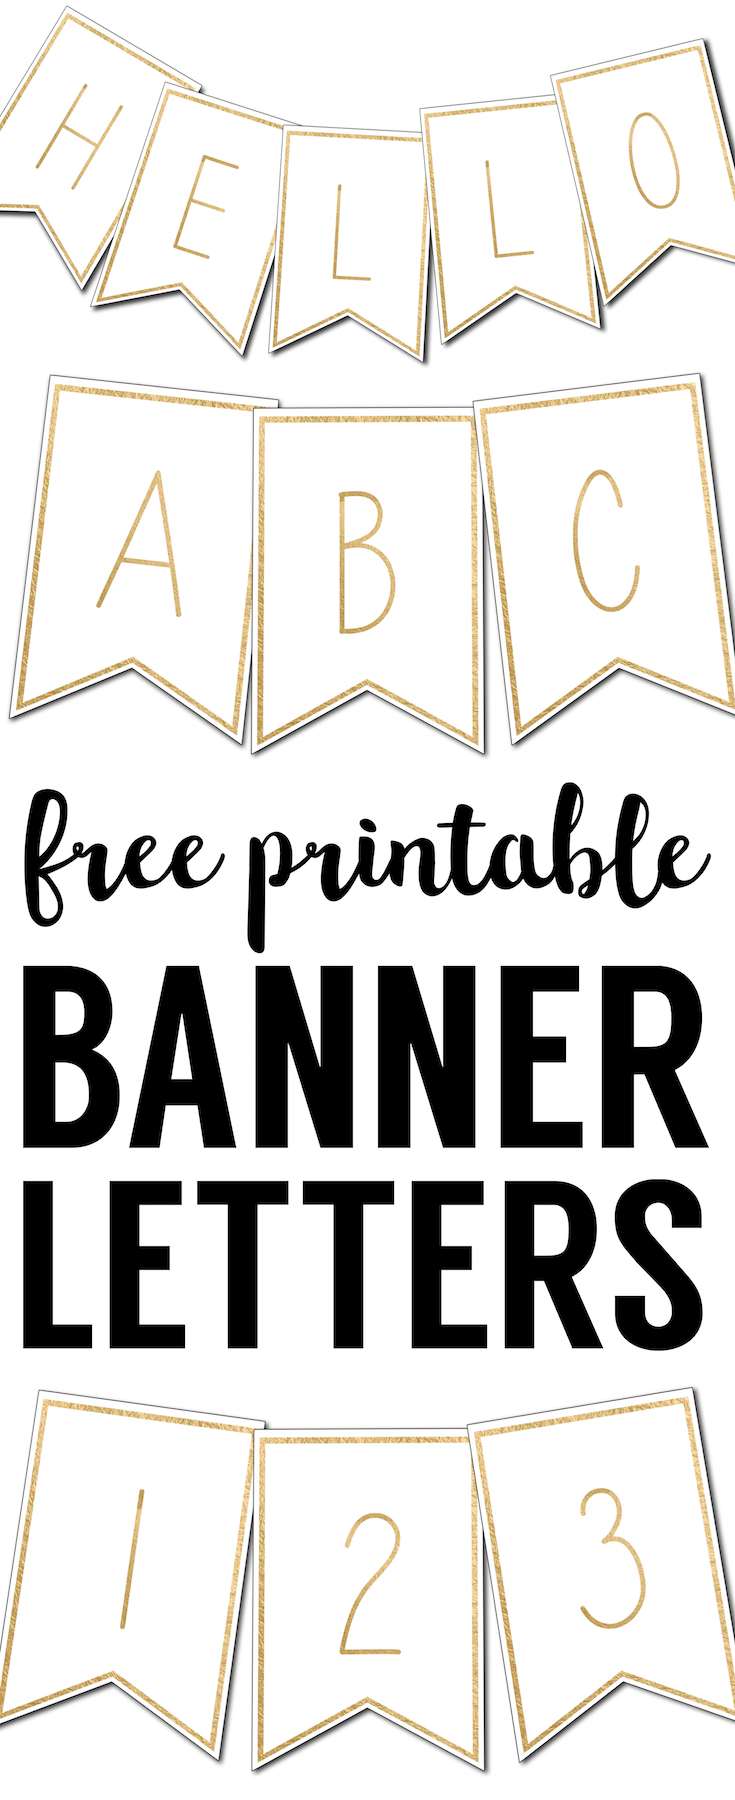 Free Printable Banners Letters